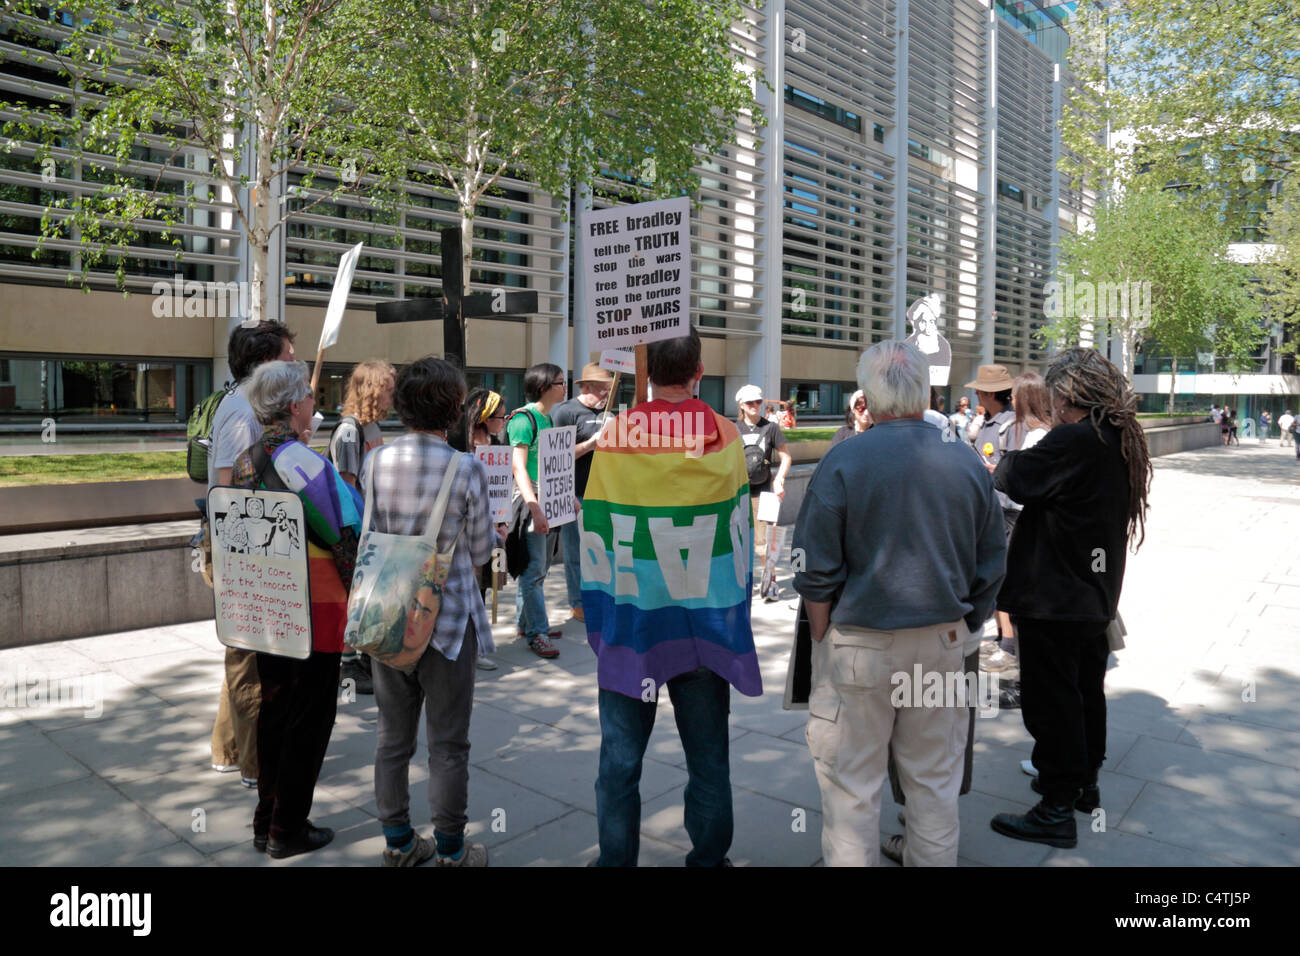 A protest for Bradley Manning (leaked Iraq info to Wikileaks in 2010) outside the Home Office, Marsham Street, London. Stock Photo